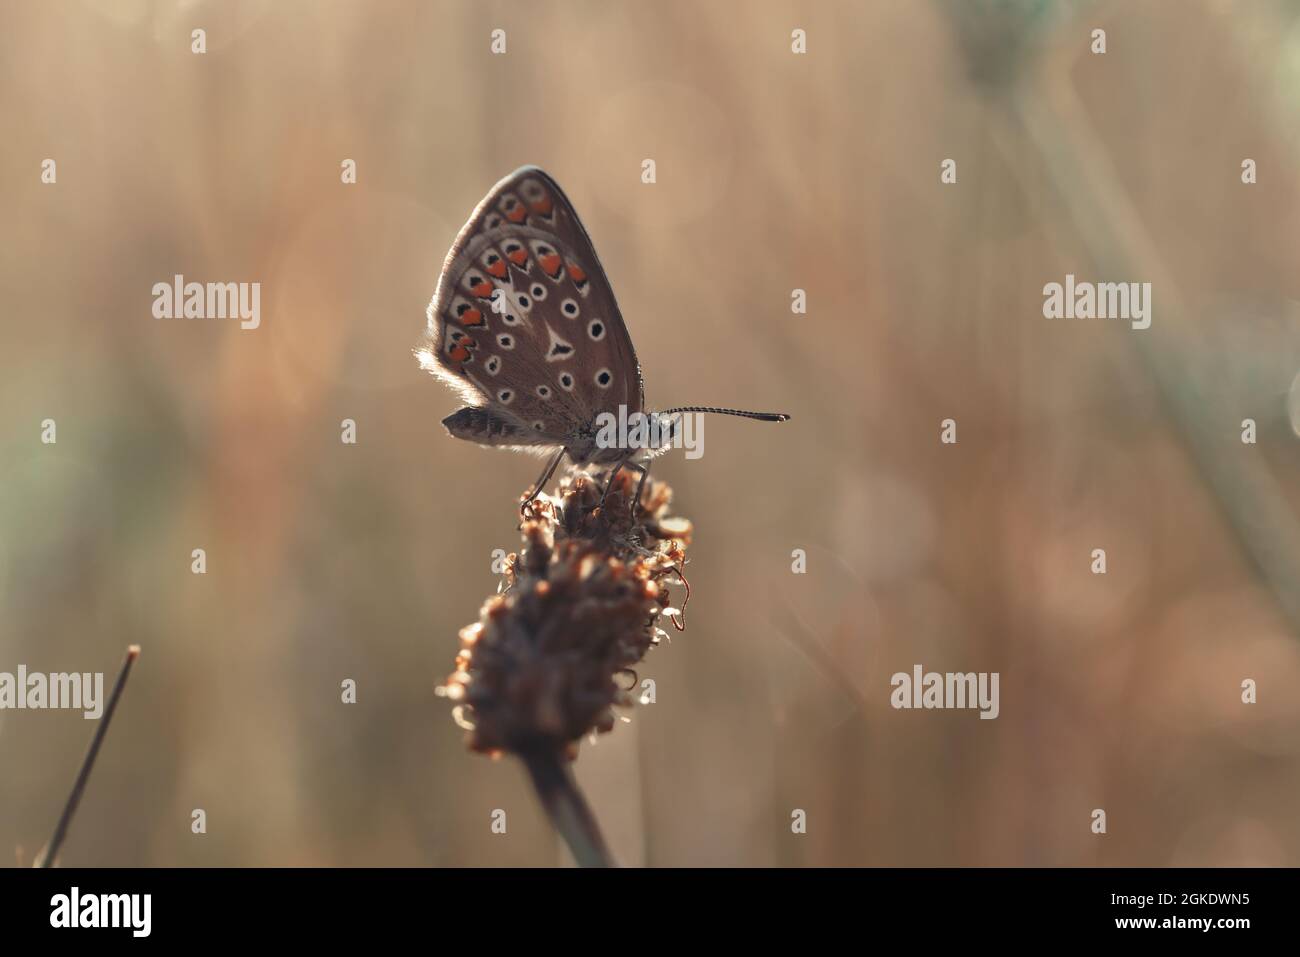 Closeup shot of a Northern Brown Argus butterfly on the plant against a blurred background Stock Photo